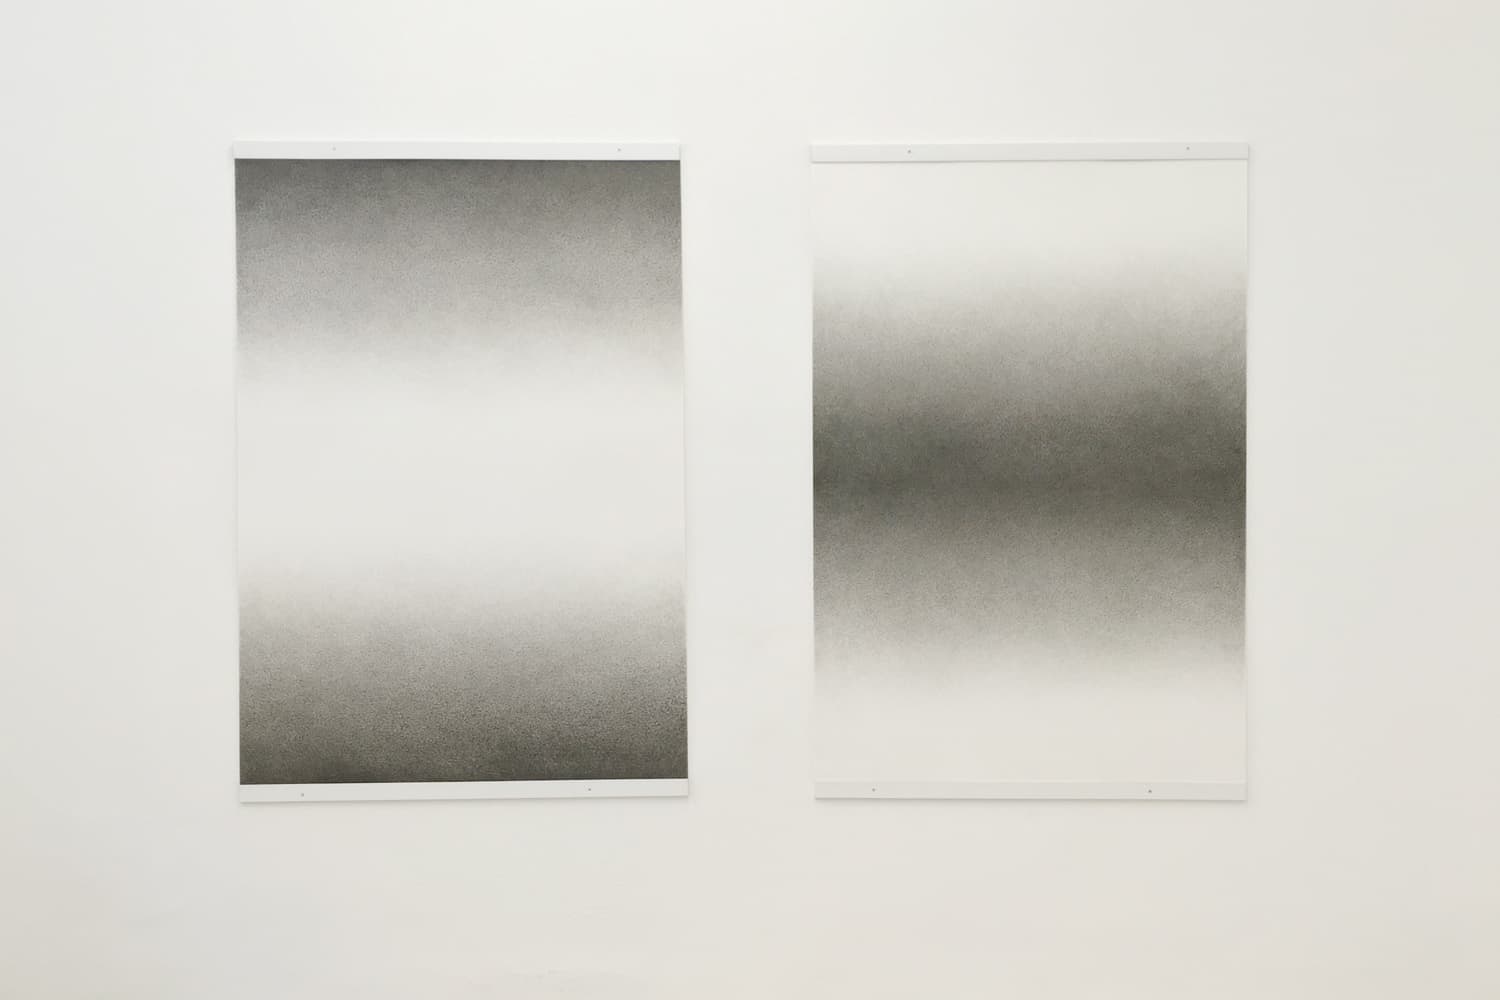 IGNACIO URIARTE | Positive and negative scribble grading, 2015 | Document proof pen on paper | cm. 143,2 x 103,2 each (diptych)